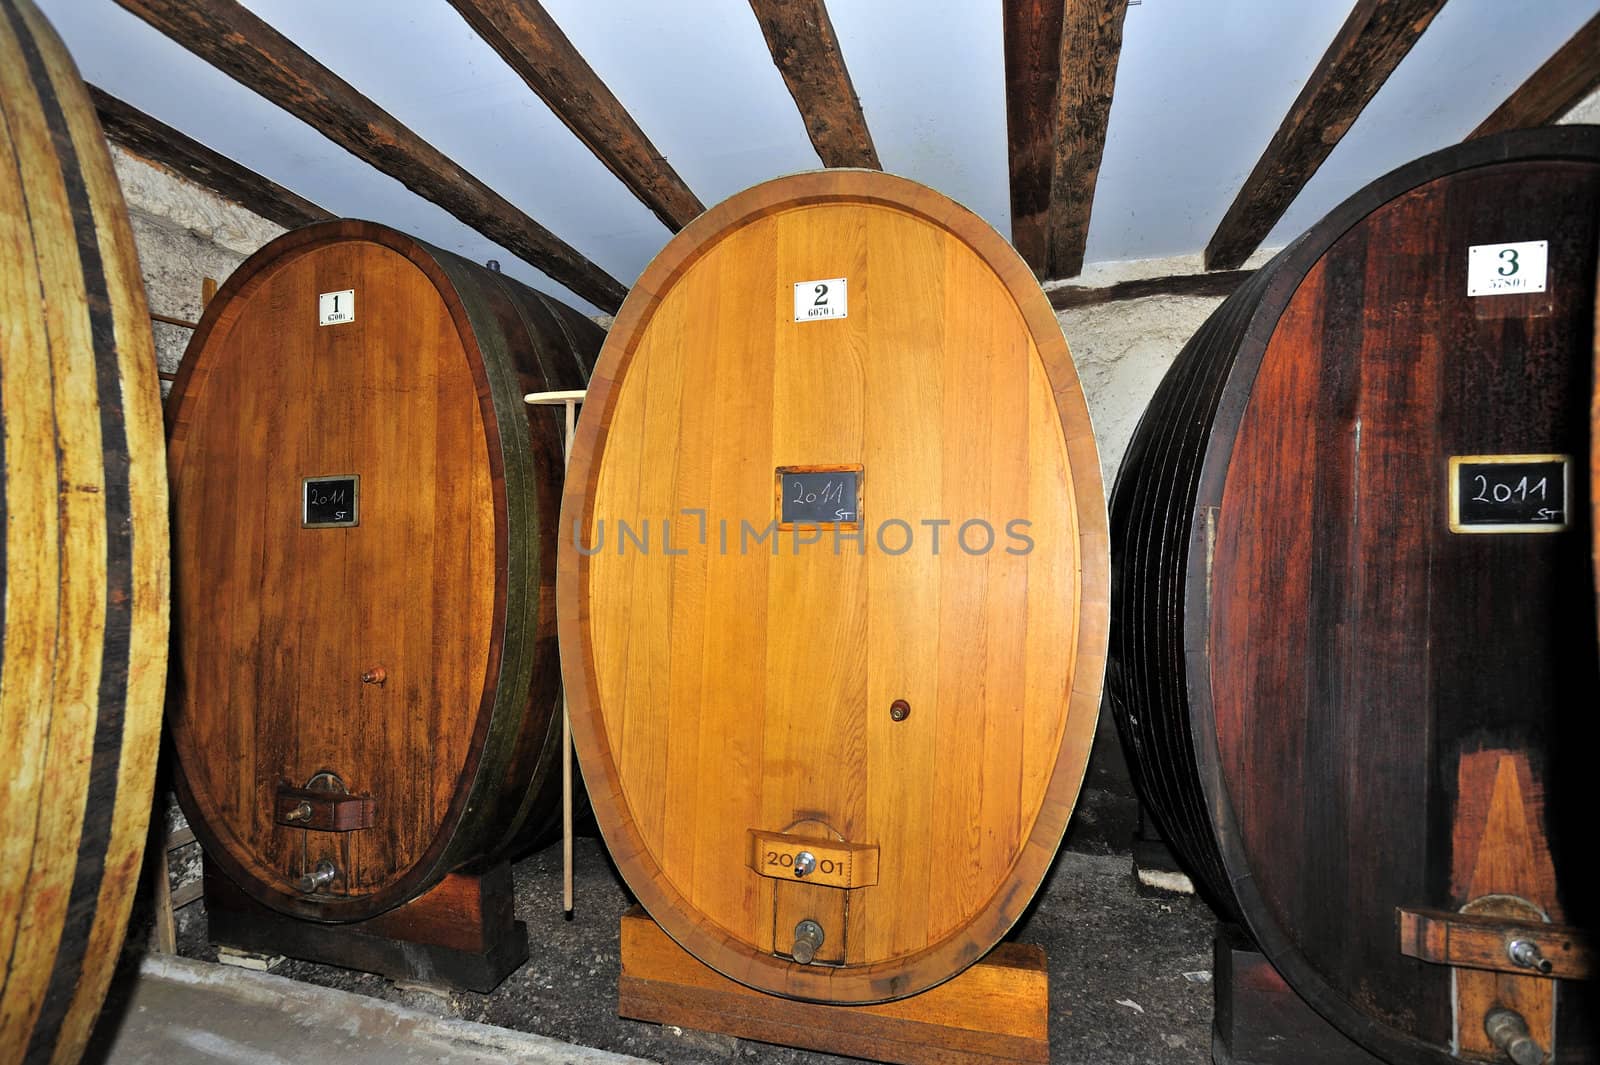 Traditional oaken barrels of fermenting wine in a Swiss wine-producer's cellar (cave). The Swiss do produce wine, lots of it. It's little known because they drink most of it themselves. Less than 2% is exported.
